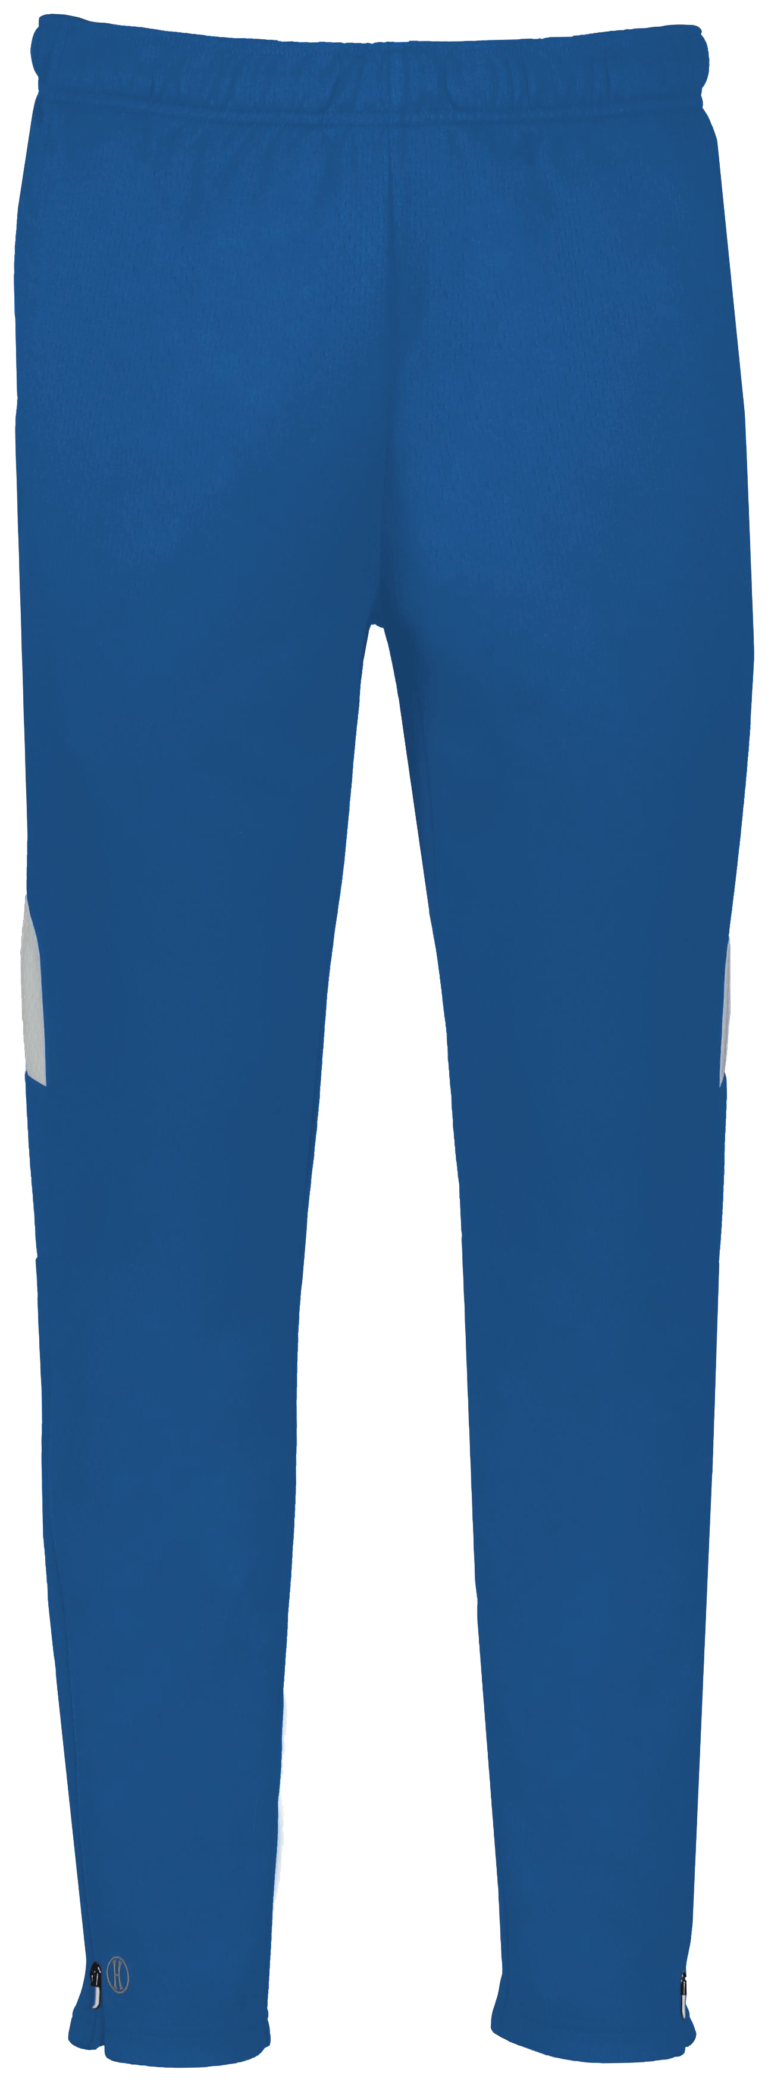 LIMITLESS Cheer SweatPANT